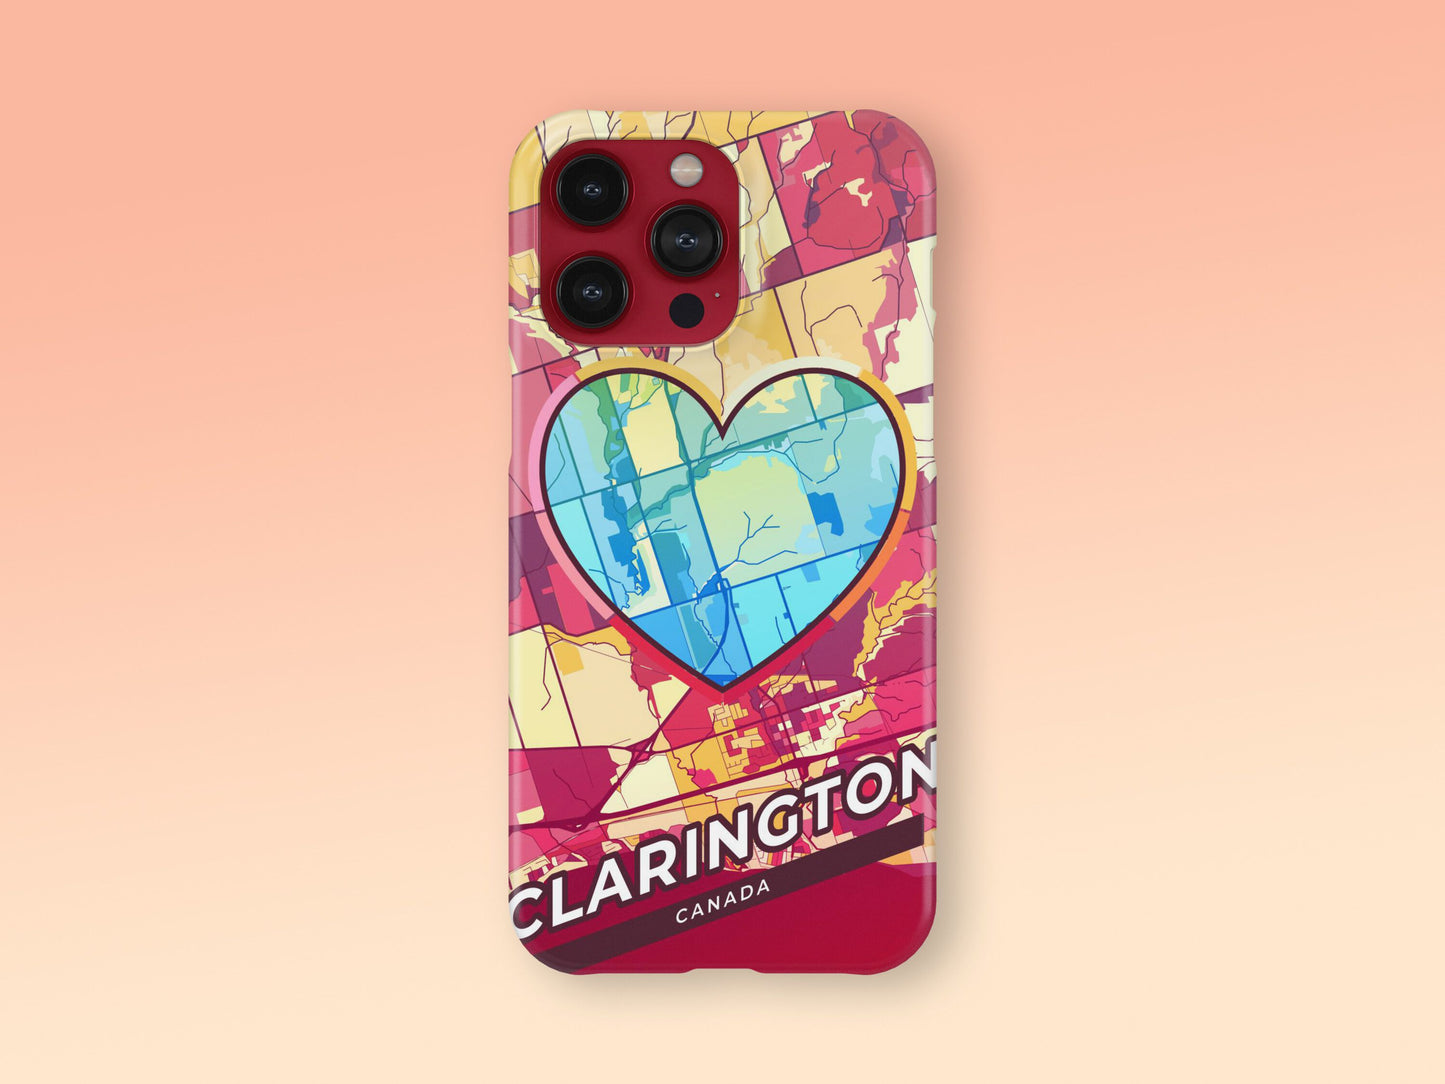 Clarington Canada slim phone case with colorful icon. Birthday, wedding or housewarming gift. Couple match cases. 2